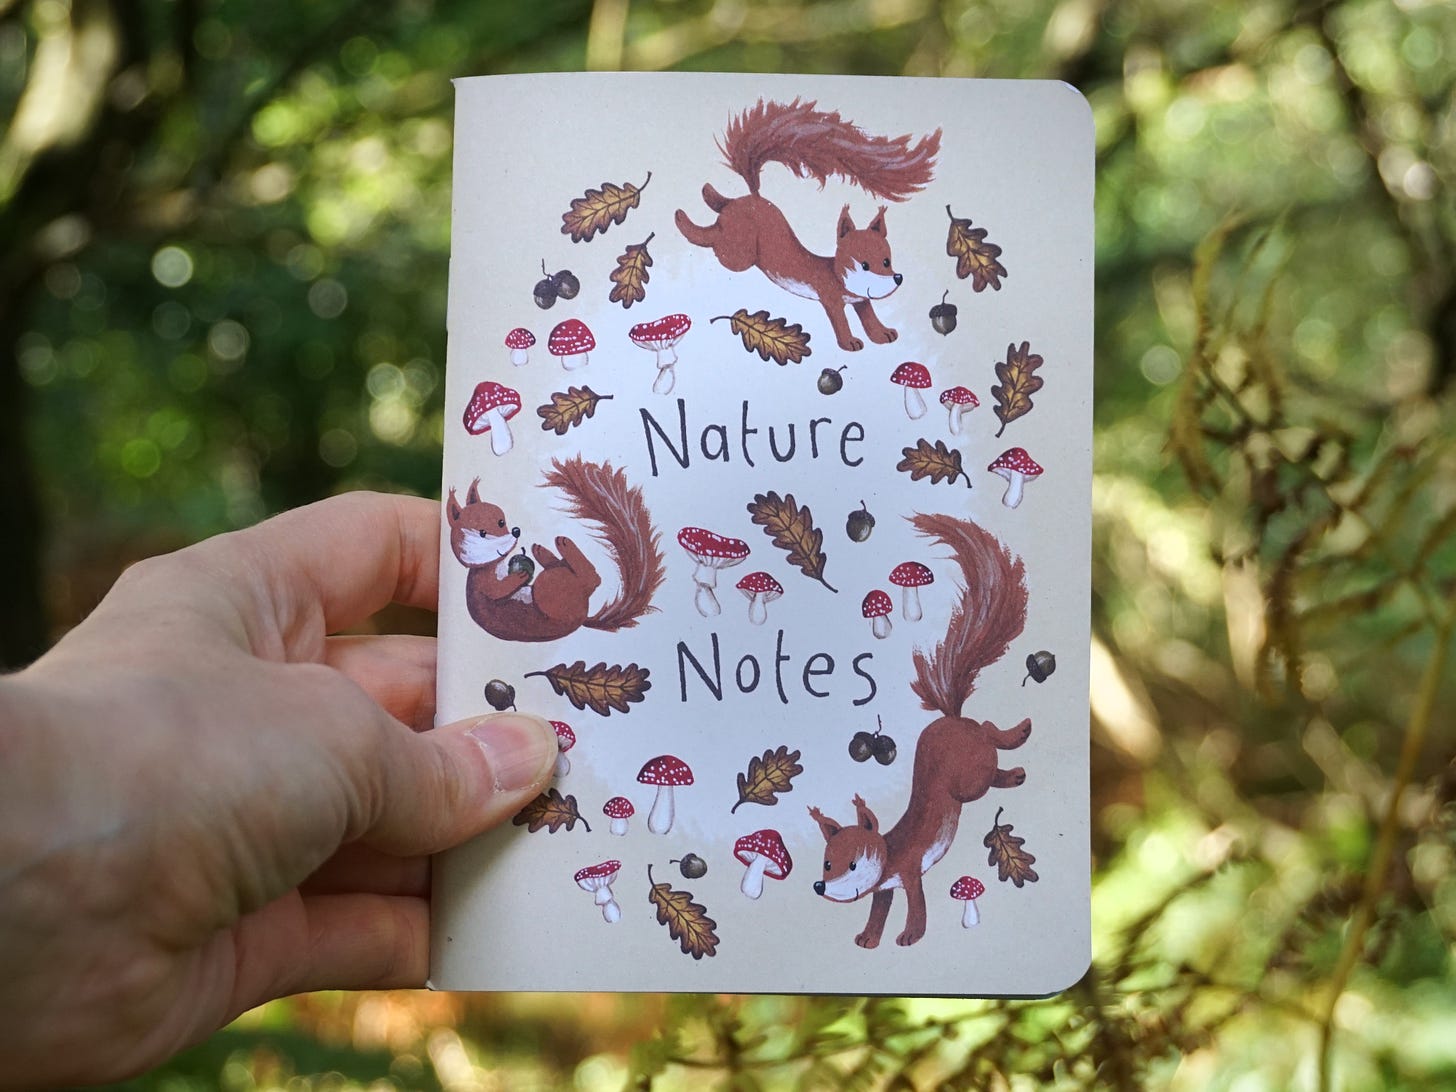 Image description: A white person's hand holds up a little notebook in front of some trees in the sunny woods. The cover of the notebook has rounded corners and is illustrated with tumbling squirrels, acorns, mushrooms and oak leaves.